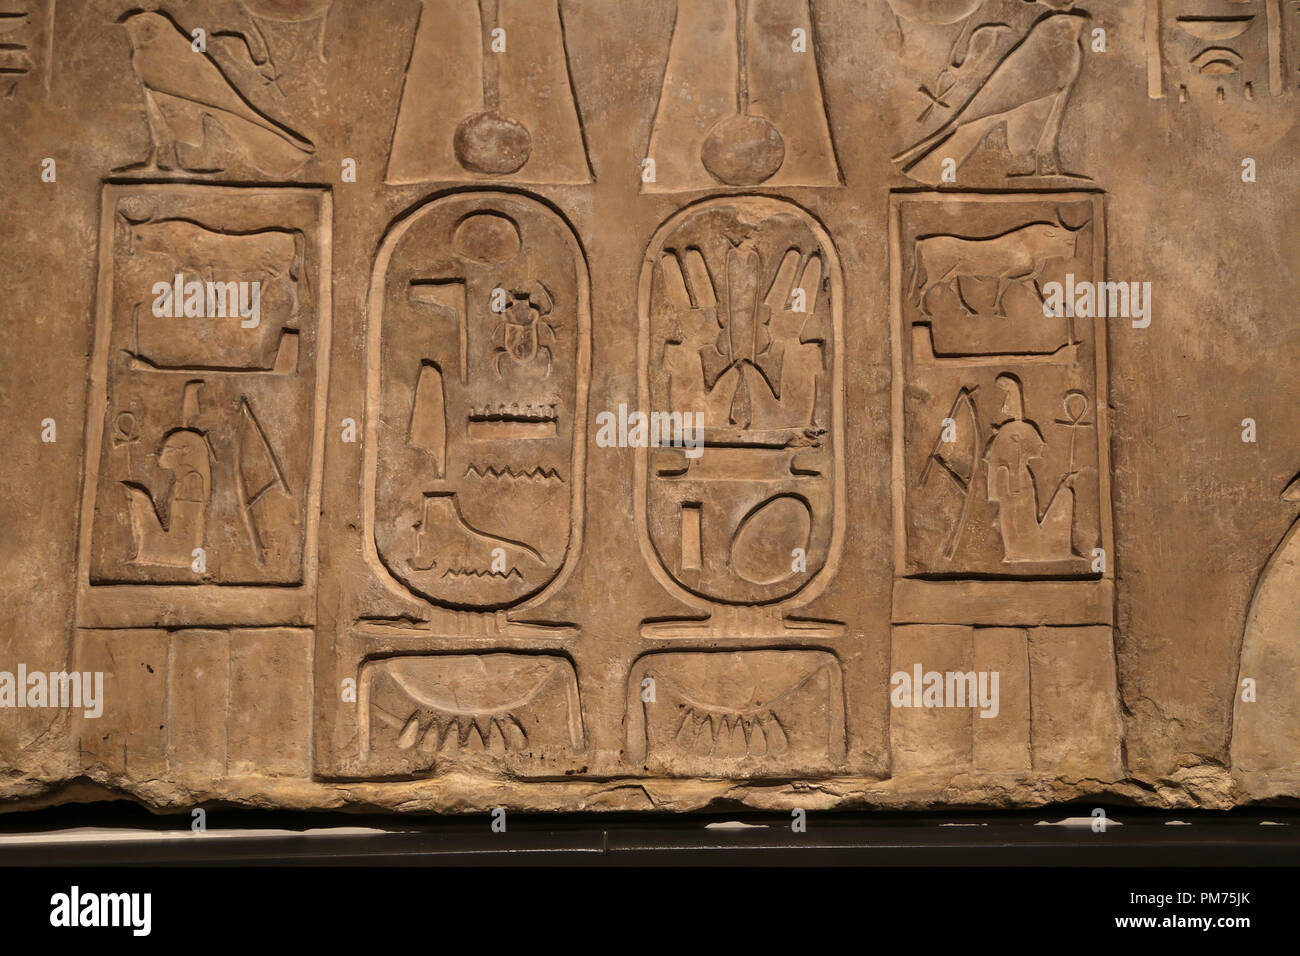 Detail of intel . Cartouches of Siamun (6th Pharaon Dynasty 21) flanked on either side byAnkhefenmut. 978-959 BC, Stock Photo